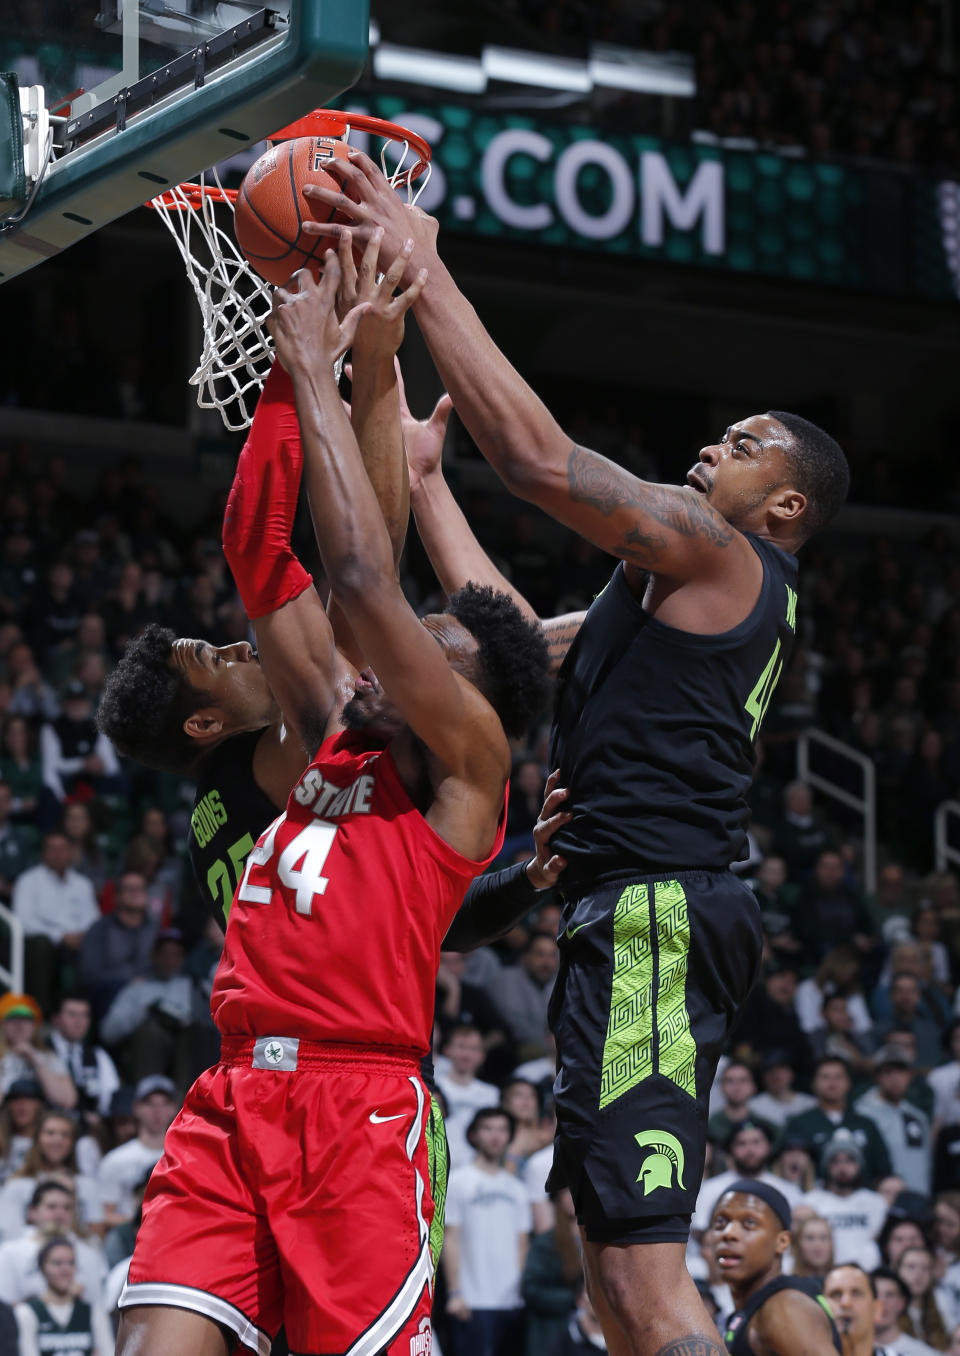 Michigan State's Nick Ward, right, and Kenny Goins, left, and Ohio State's Andre Wesson, center, battle for a rebound during the first half of an NCAA college basketball game, Sunday, Feb. 17, 2019, in East Lansing, Mich. (AP Photo/Al Goldis)